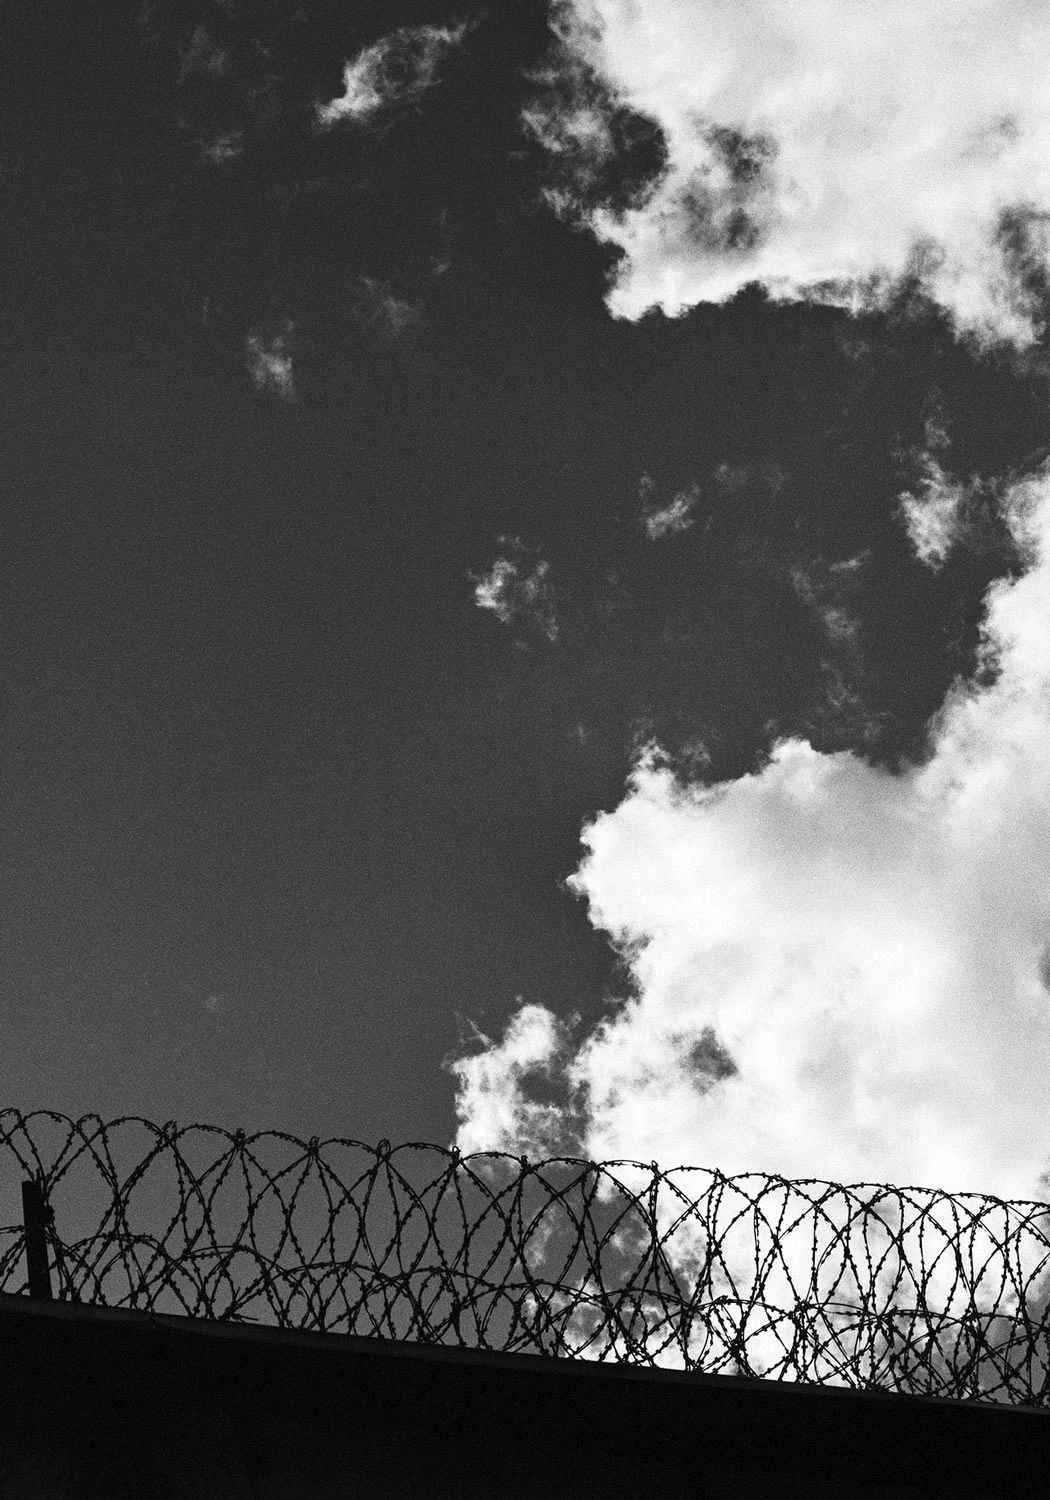 Prison fence with a great portion of cloudy sky